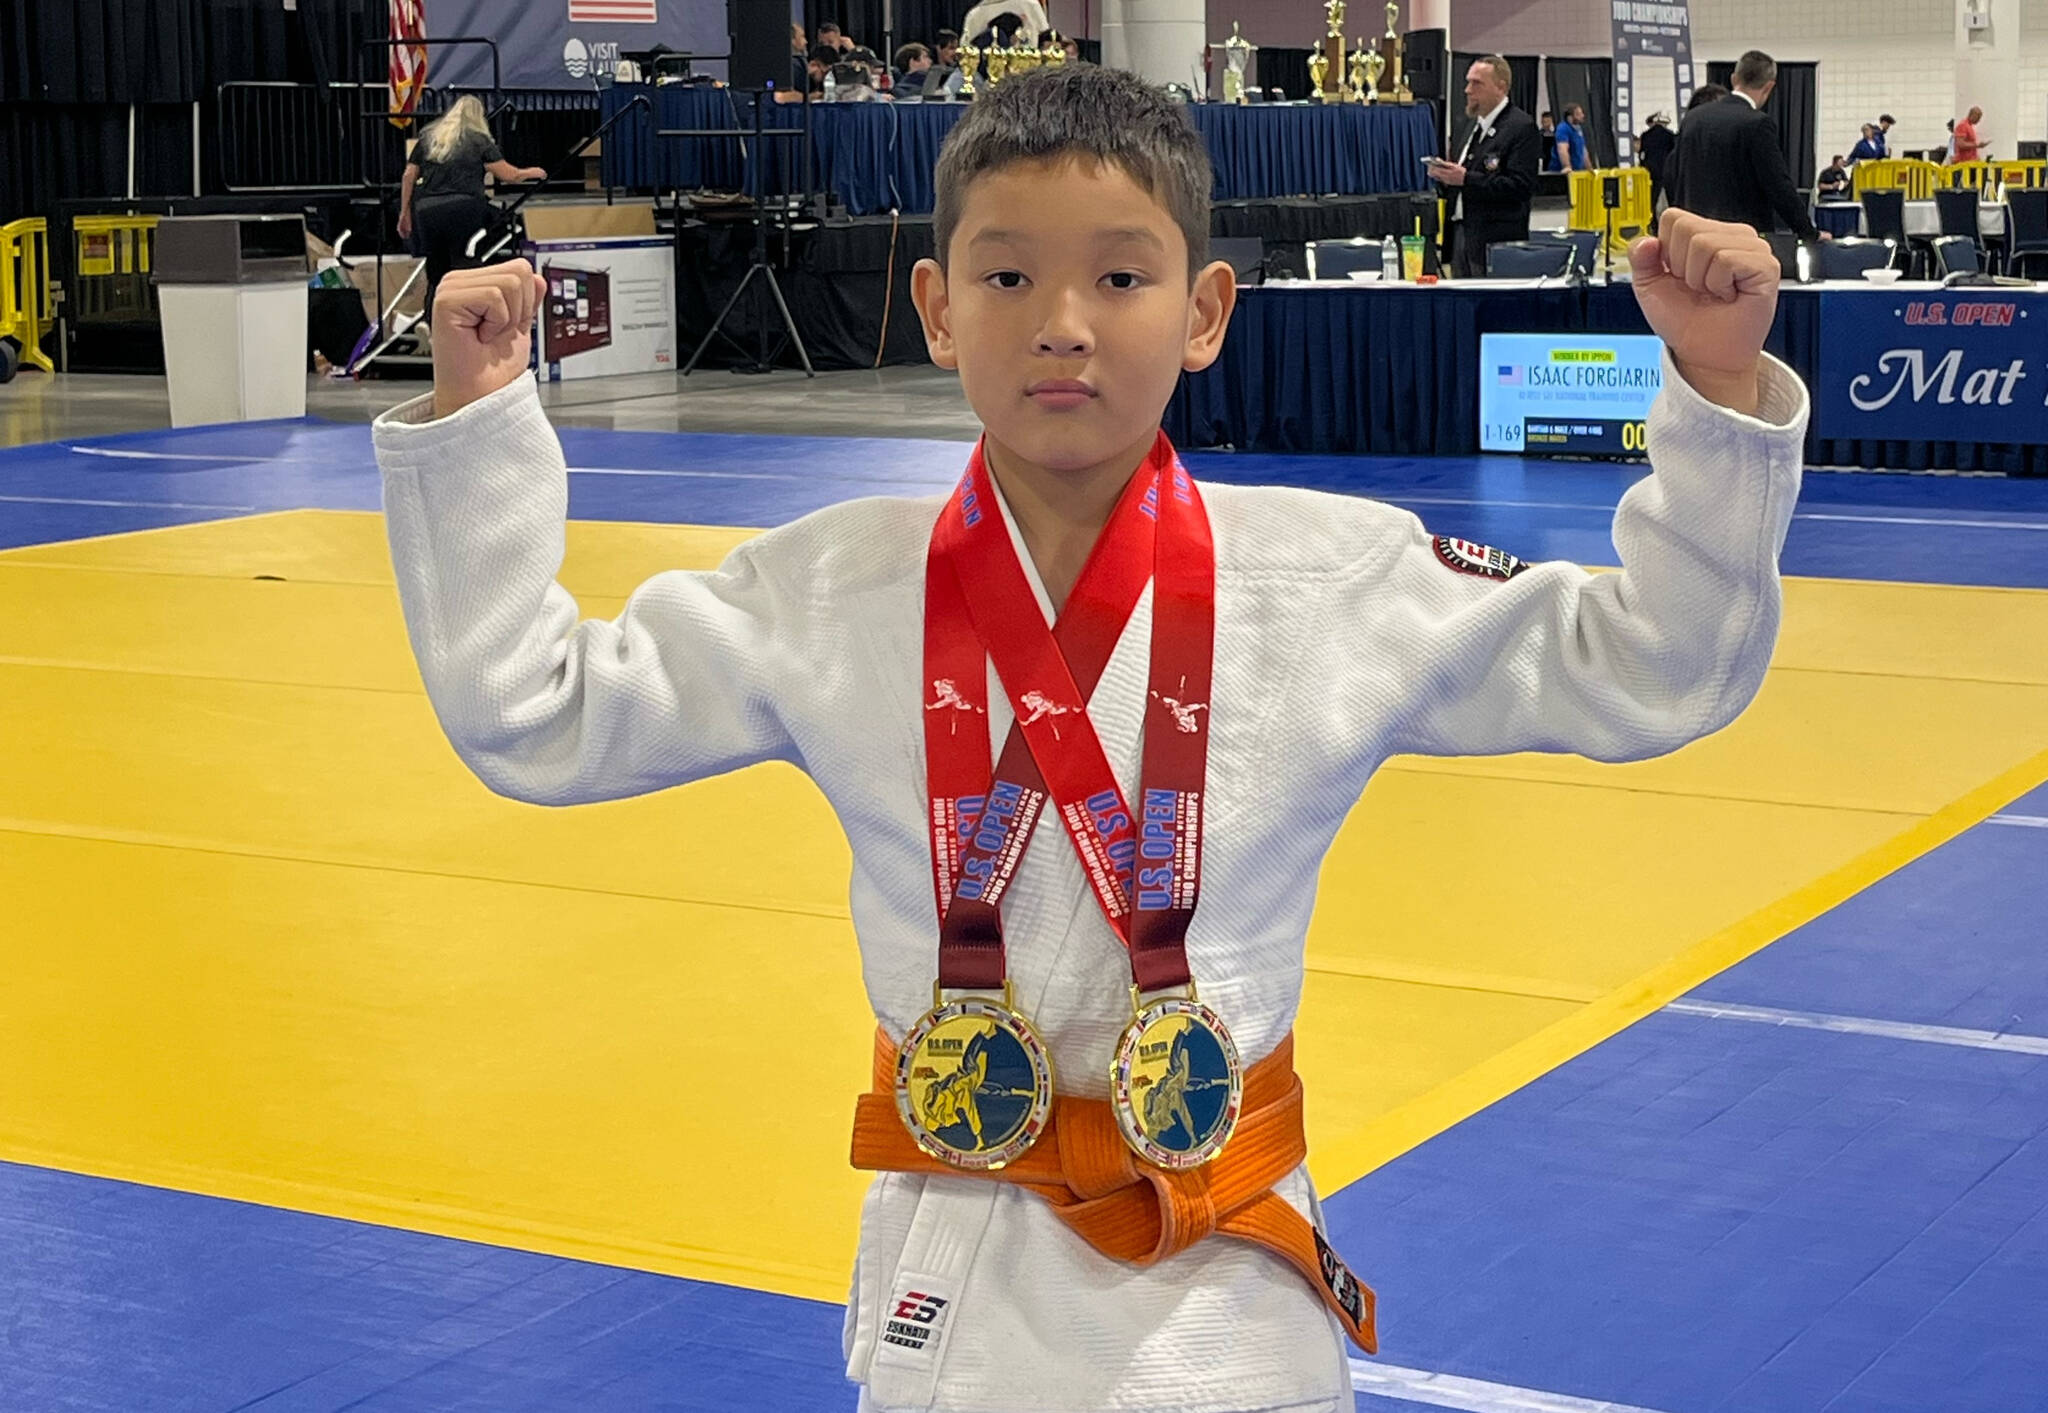 Mikhail Zulaev, a Mercer Island School District student, snagged a pair of judo gold medals at the US Open Judo Championships from July 28-30 in Fort Lauderdale, Florida. He won awards in Bantam 4 under 30 kg (boys born in 2015) and Bantam 5 to 29 kg (boys born in 2014). Courtesy photo